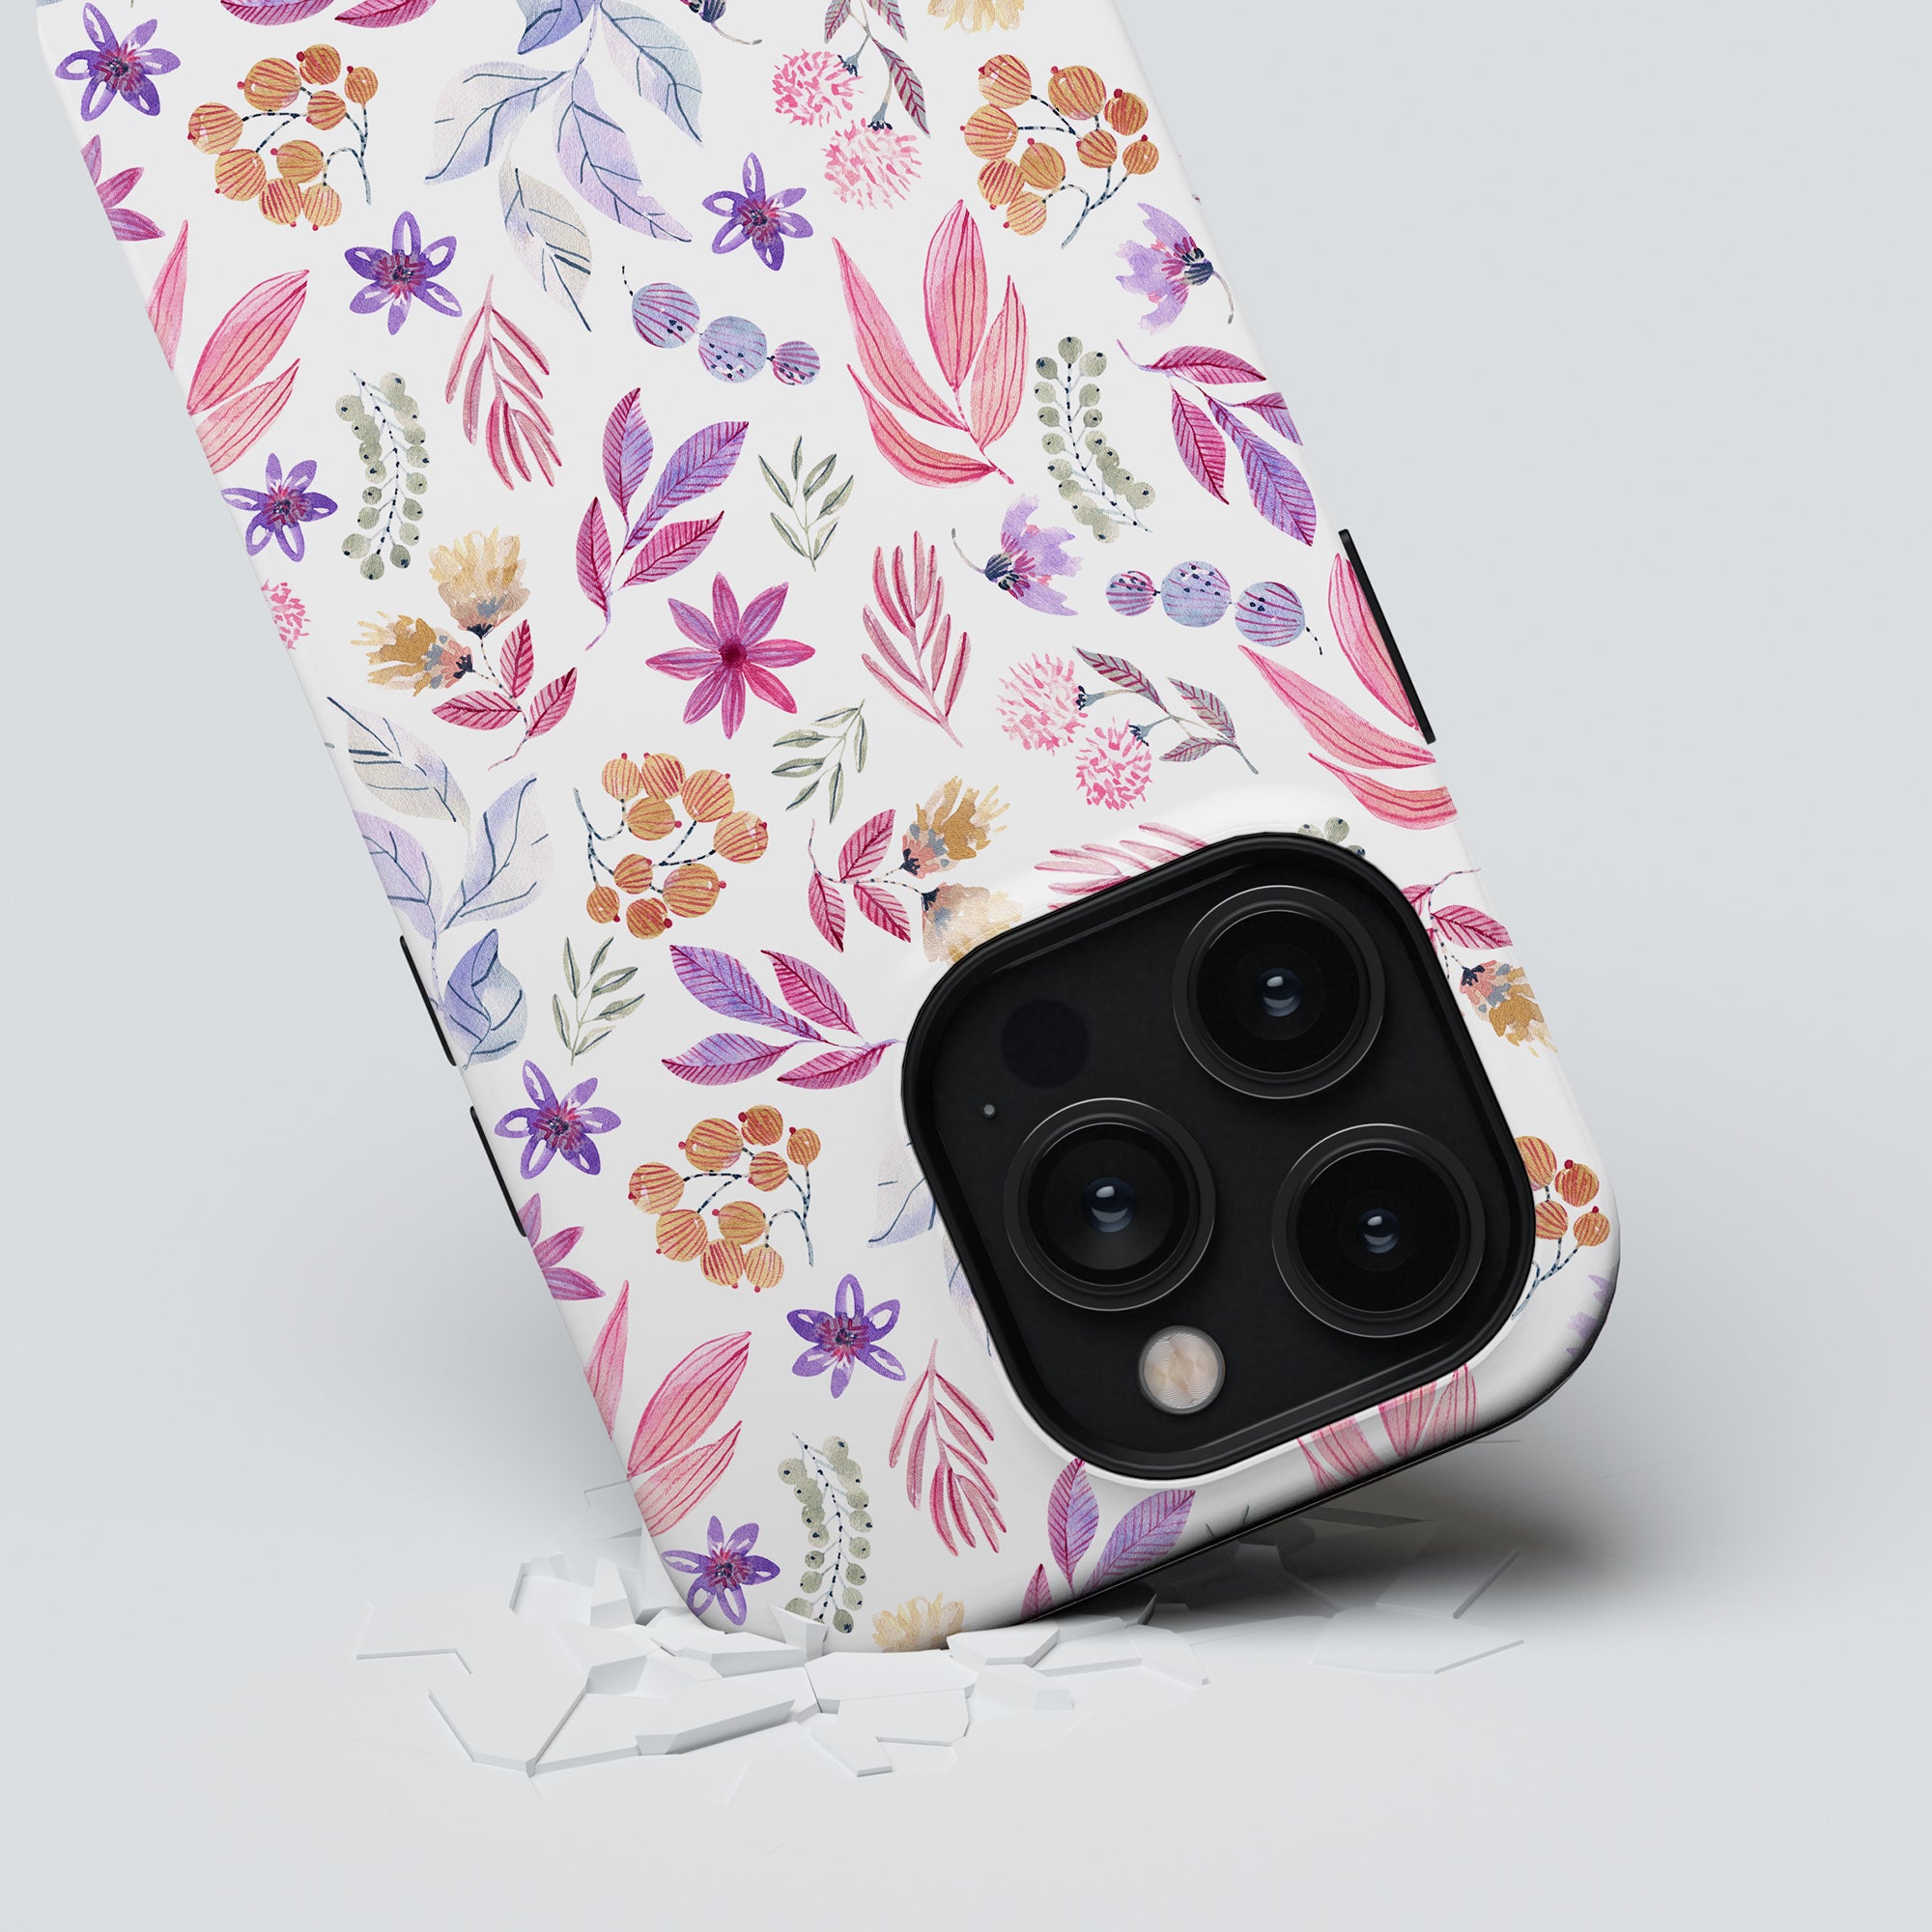 A smartphone from the Floral Collection with a Flower Power - Tough Case rests on a light surface with cracks beneath it, suggesting it has been dropped. The phone's camera lenses are prominently visible, showcasing the maximalt skydd it offers.